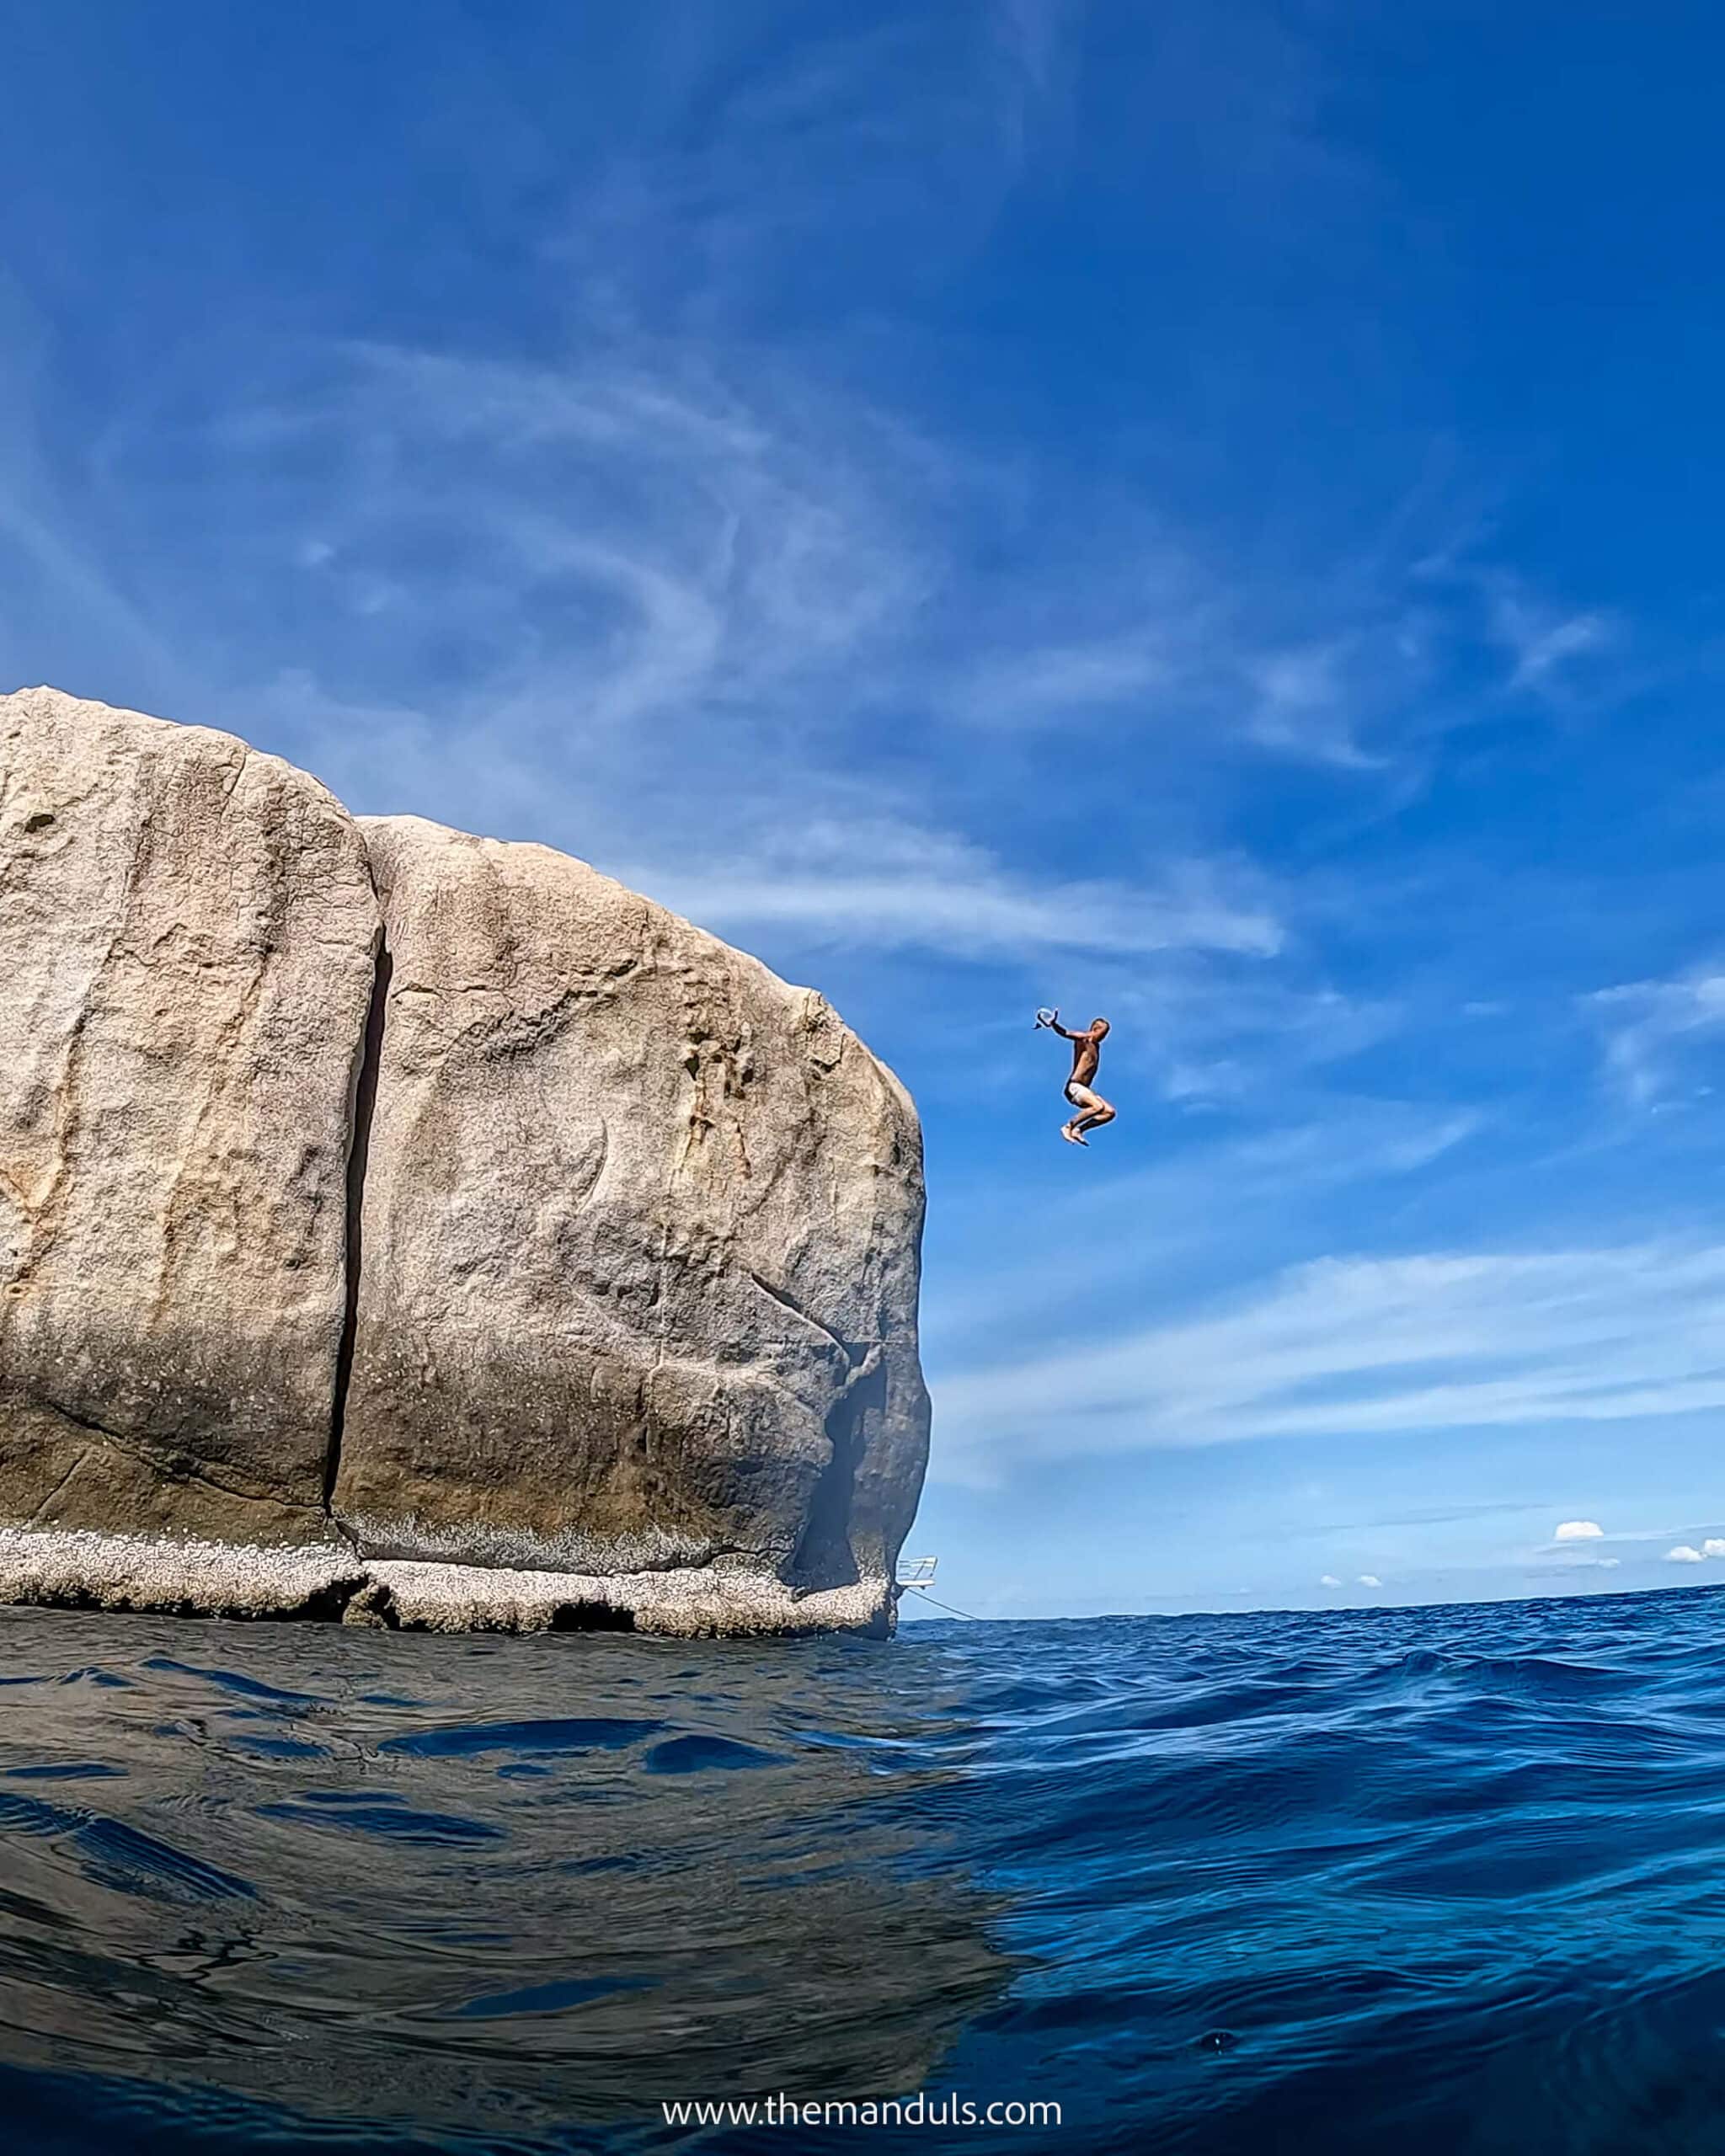 Tanote Bay Koh Tao cliff jumping, Snorkeling koh tao best things to do on Koh Tao, BEst places Koh Tao, attractions, snorkeling Koh Tao, Koh Tao Best Beaches, Koh Tao Itinerary